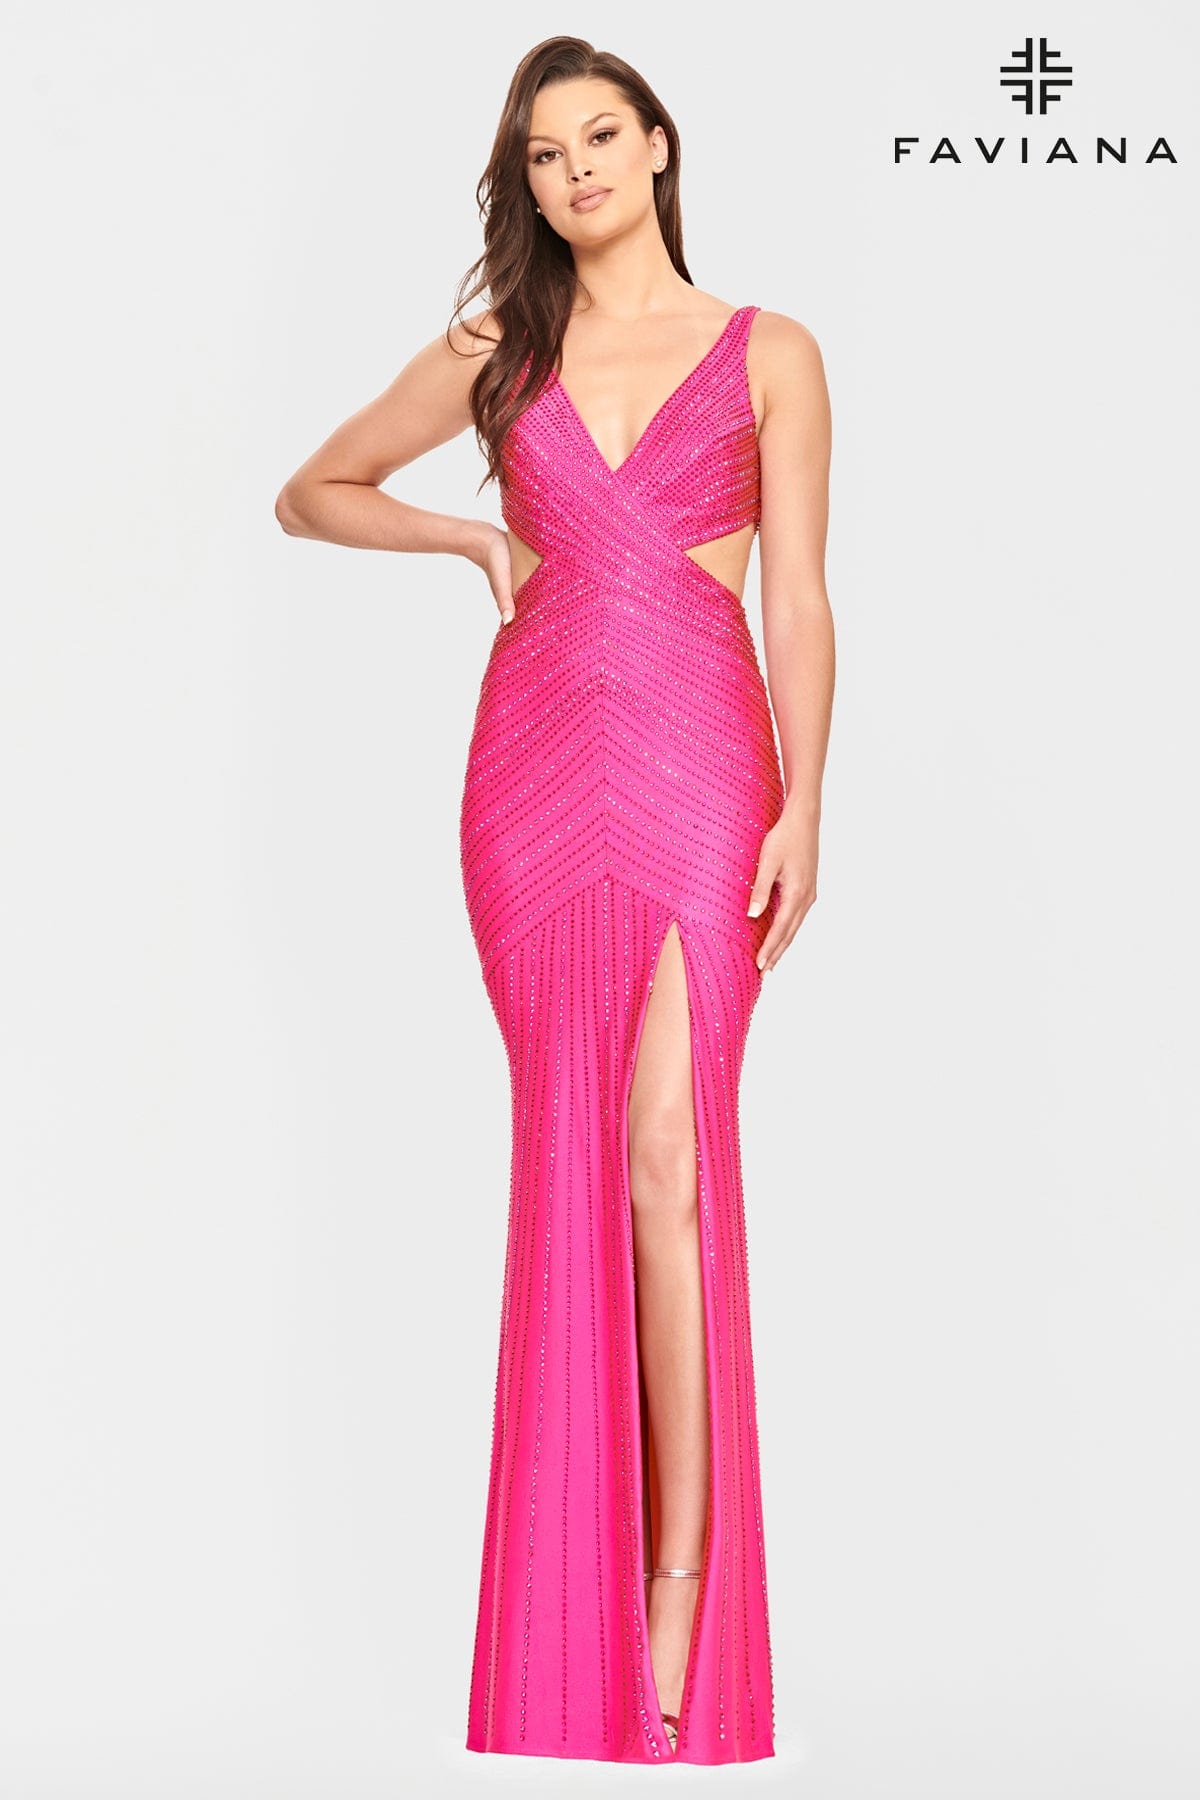 V Neck Prom Dress With Patterned Beading And Side Cutouts